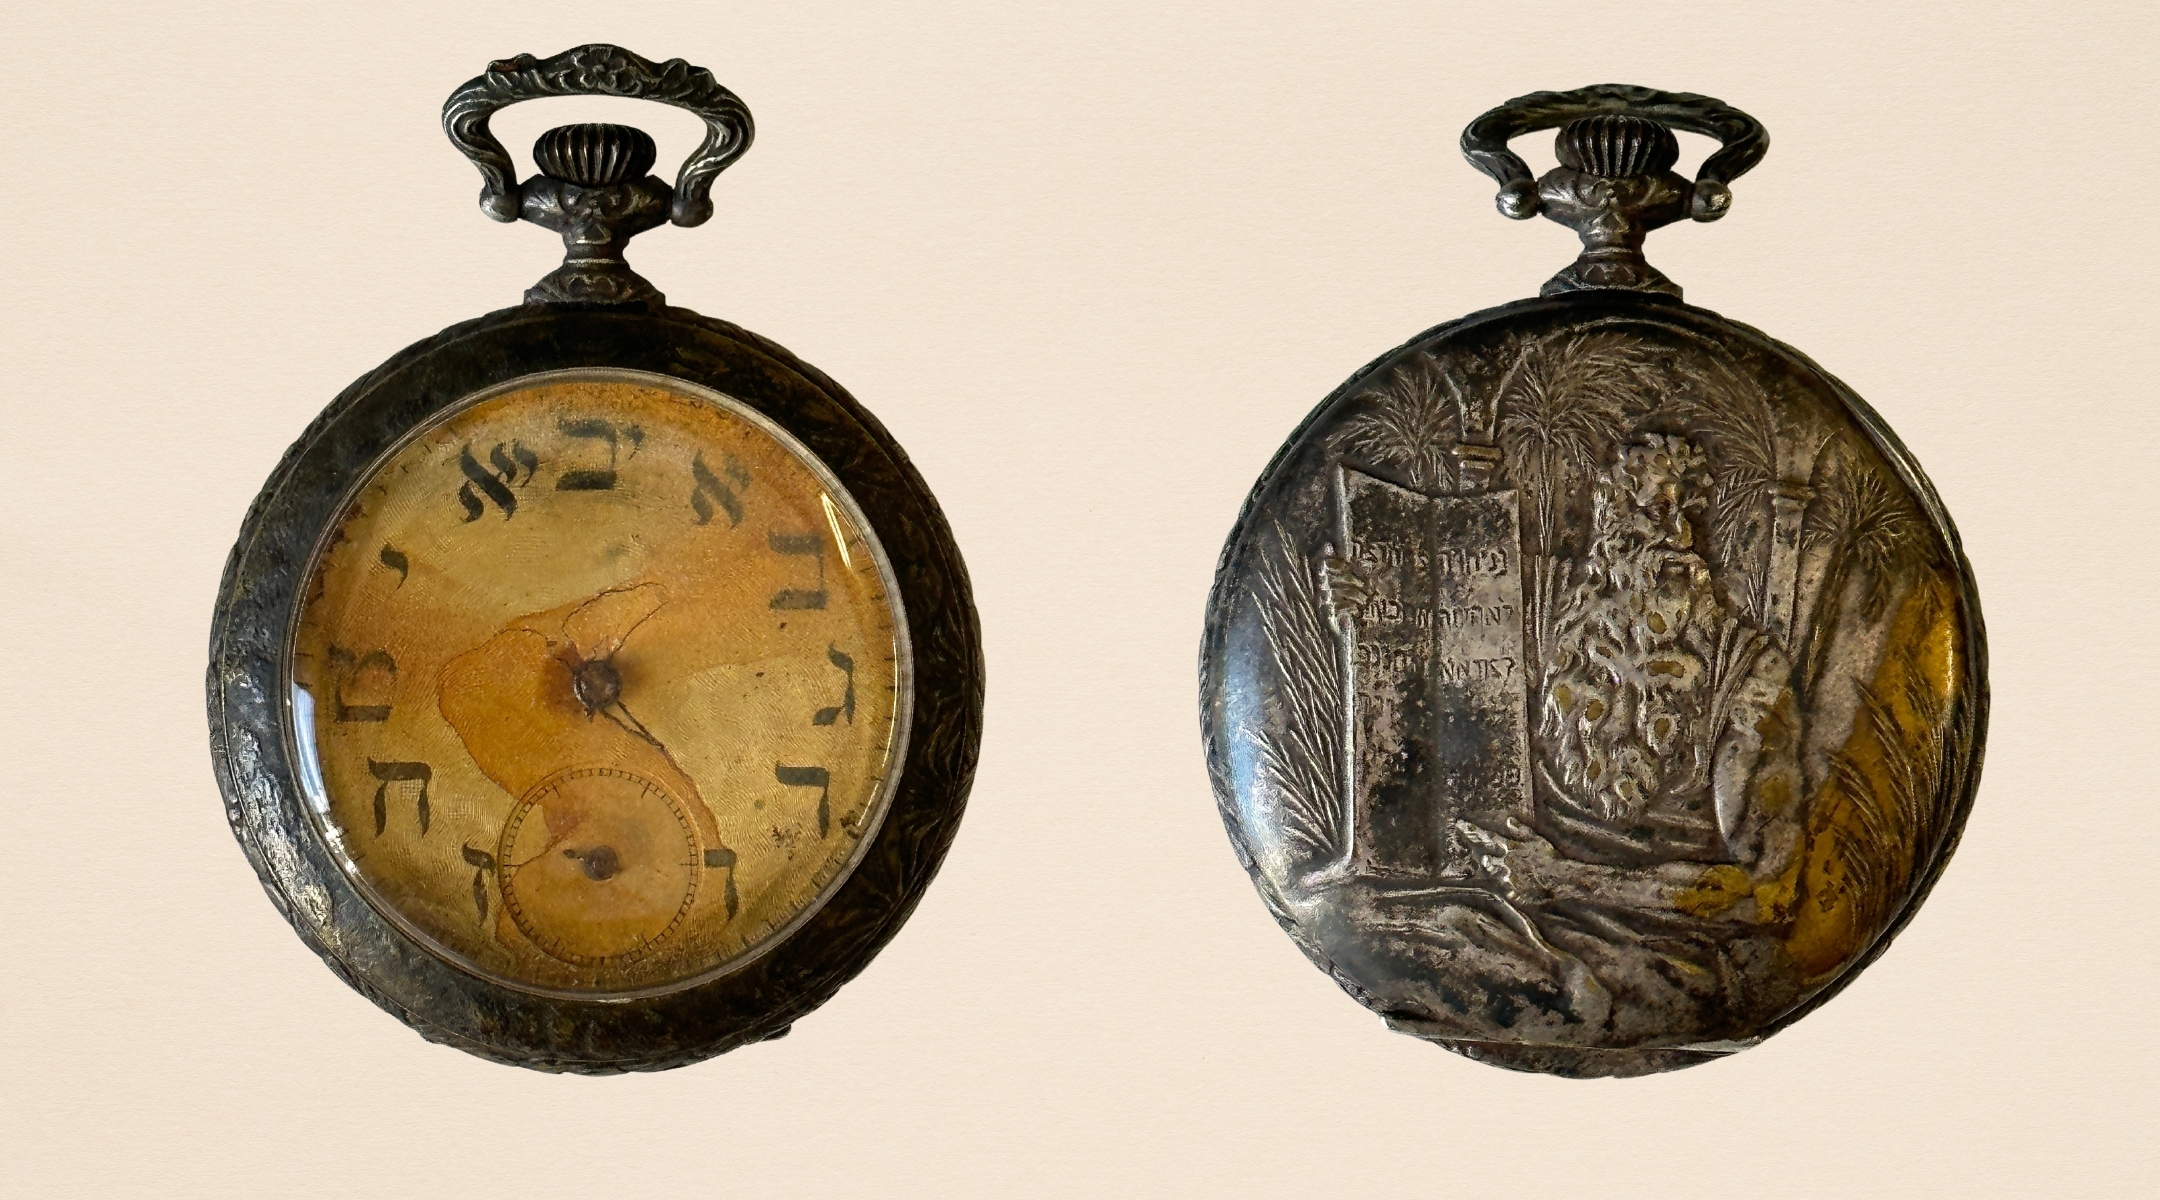 A front and back view of a pocket watch belonging to Jewish Titanic passenger Sinai Kantor, with salt water stains showing approximately when the ship sank. (Courtesy Henry Aldridge and Son. Design by Jackie Hajdenberg)